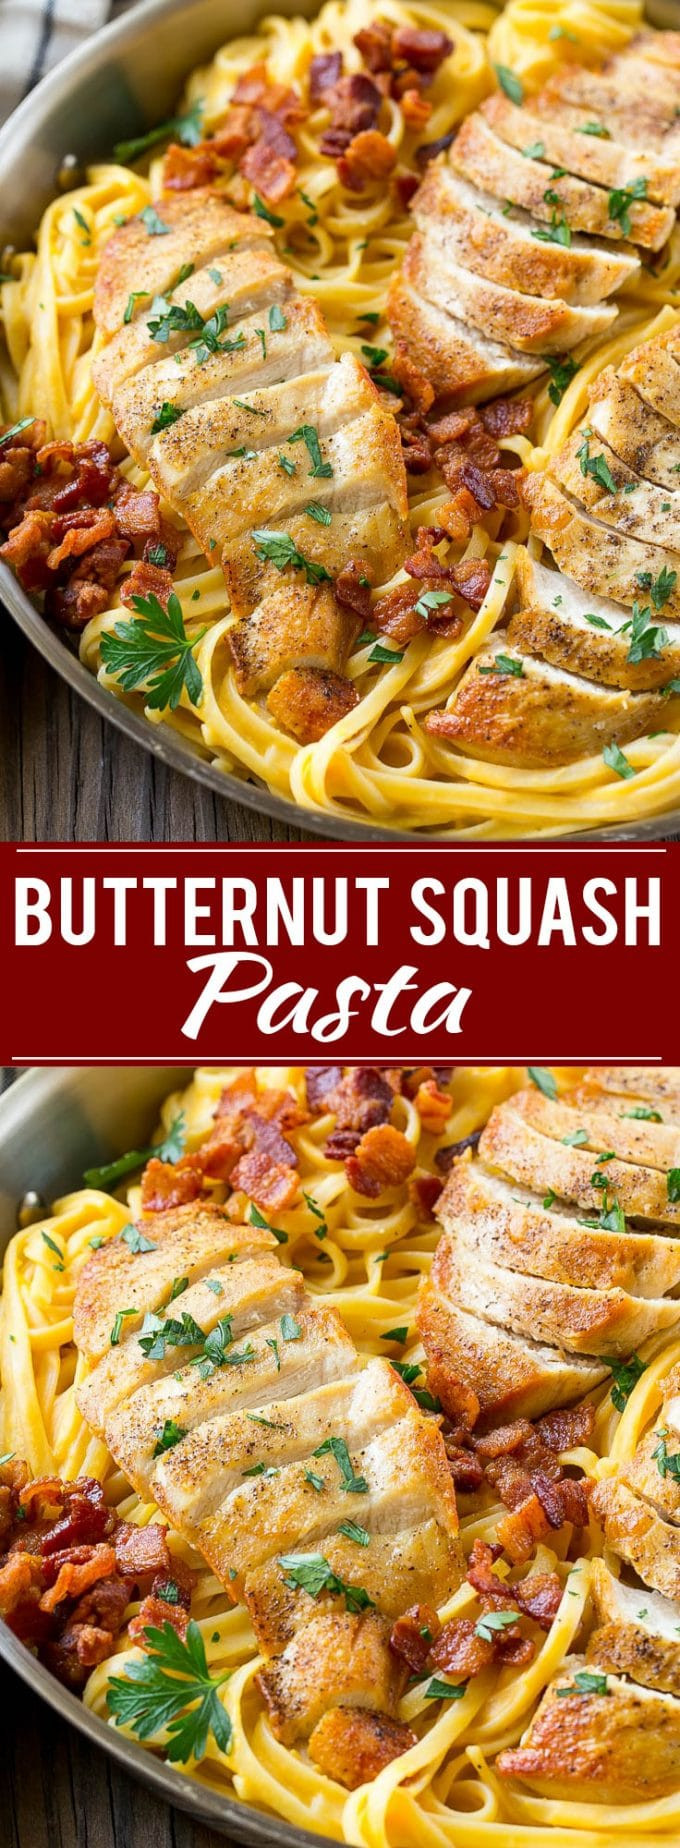 Butternut Squash Dinner Recipes
 Butternut Squash Pasta with Chicken Dinner at the Zoo